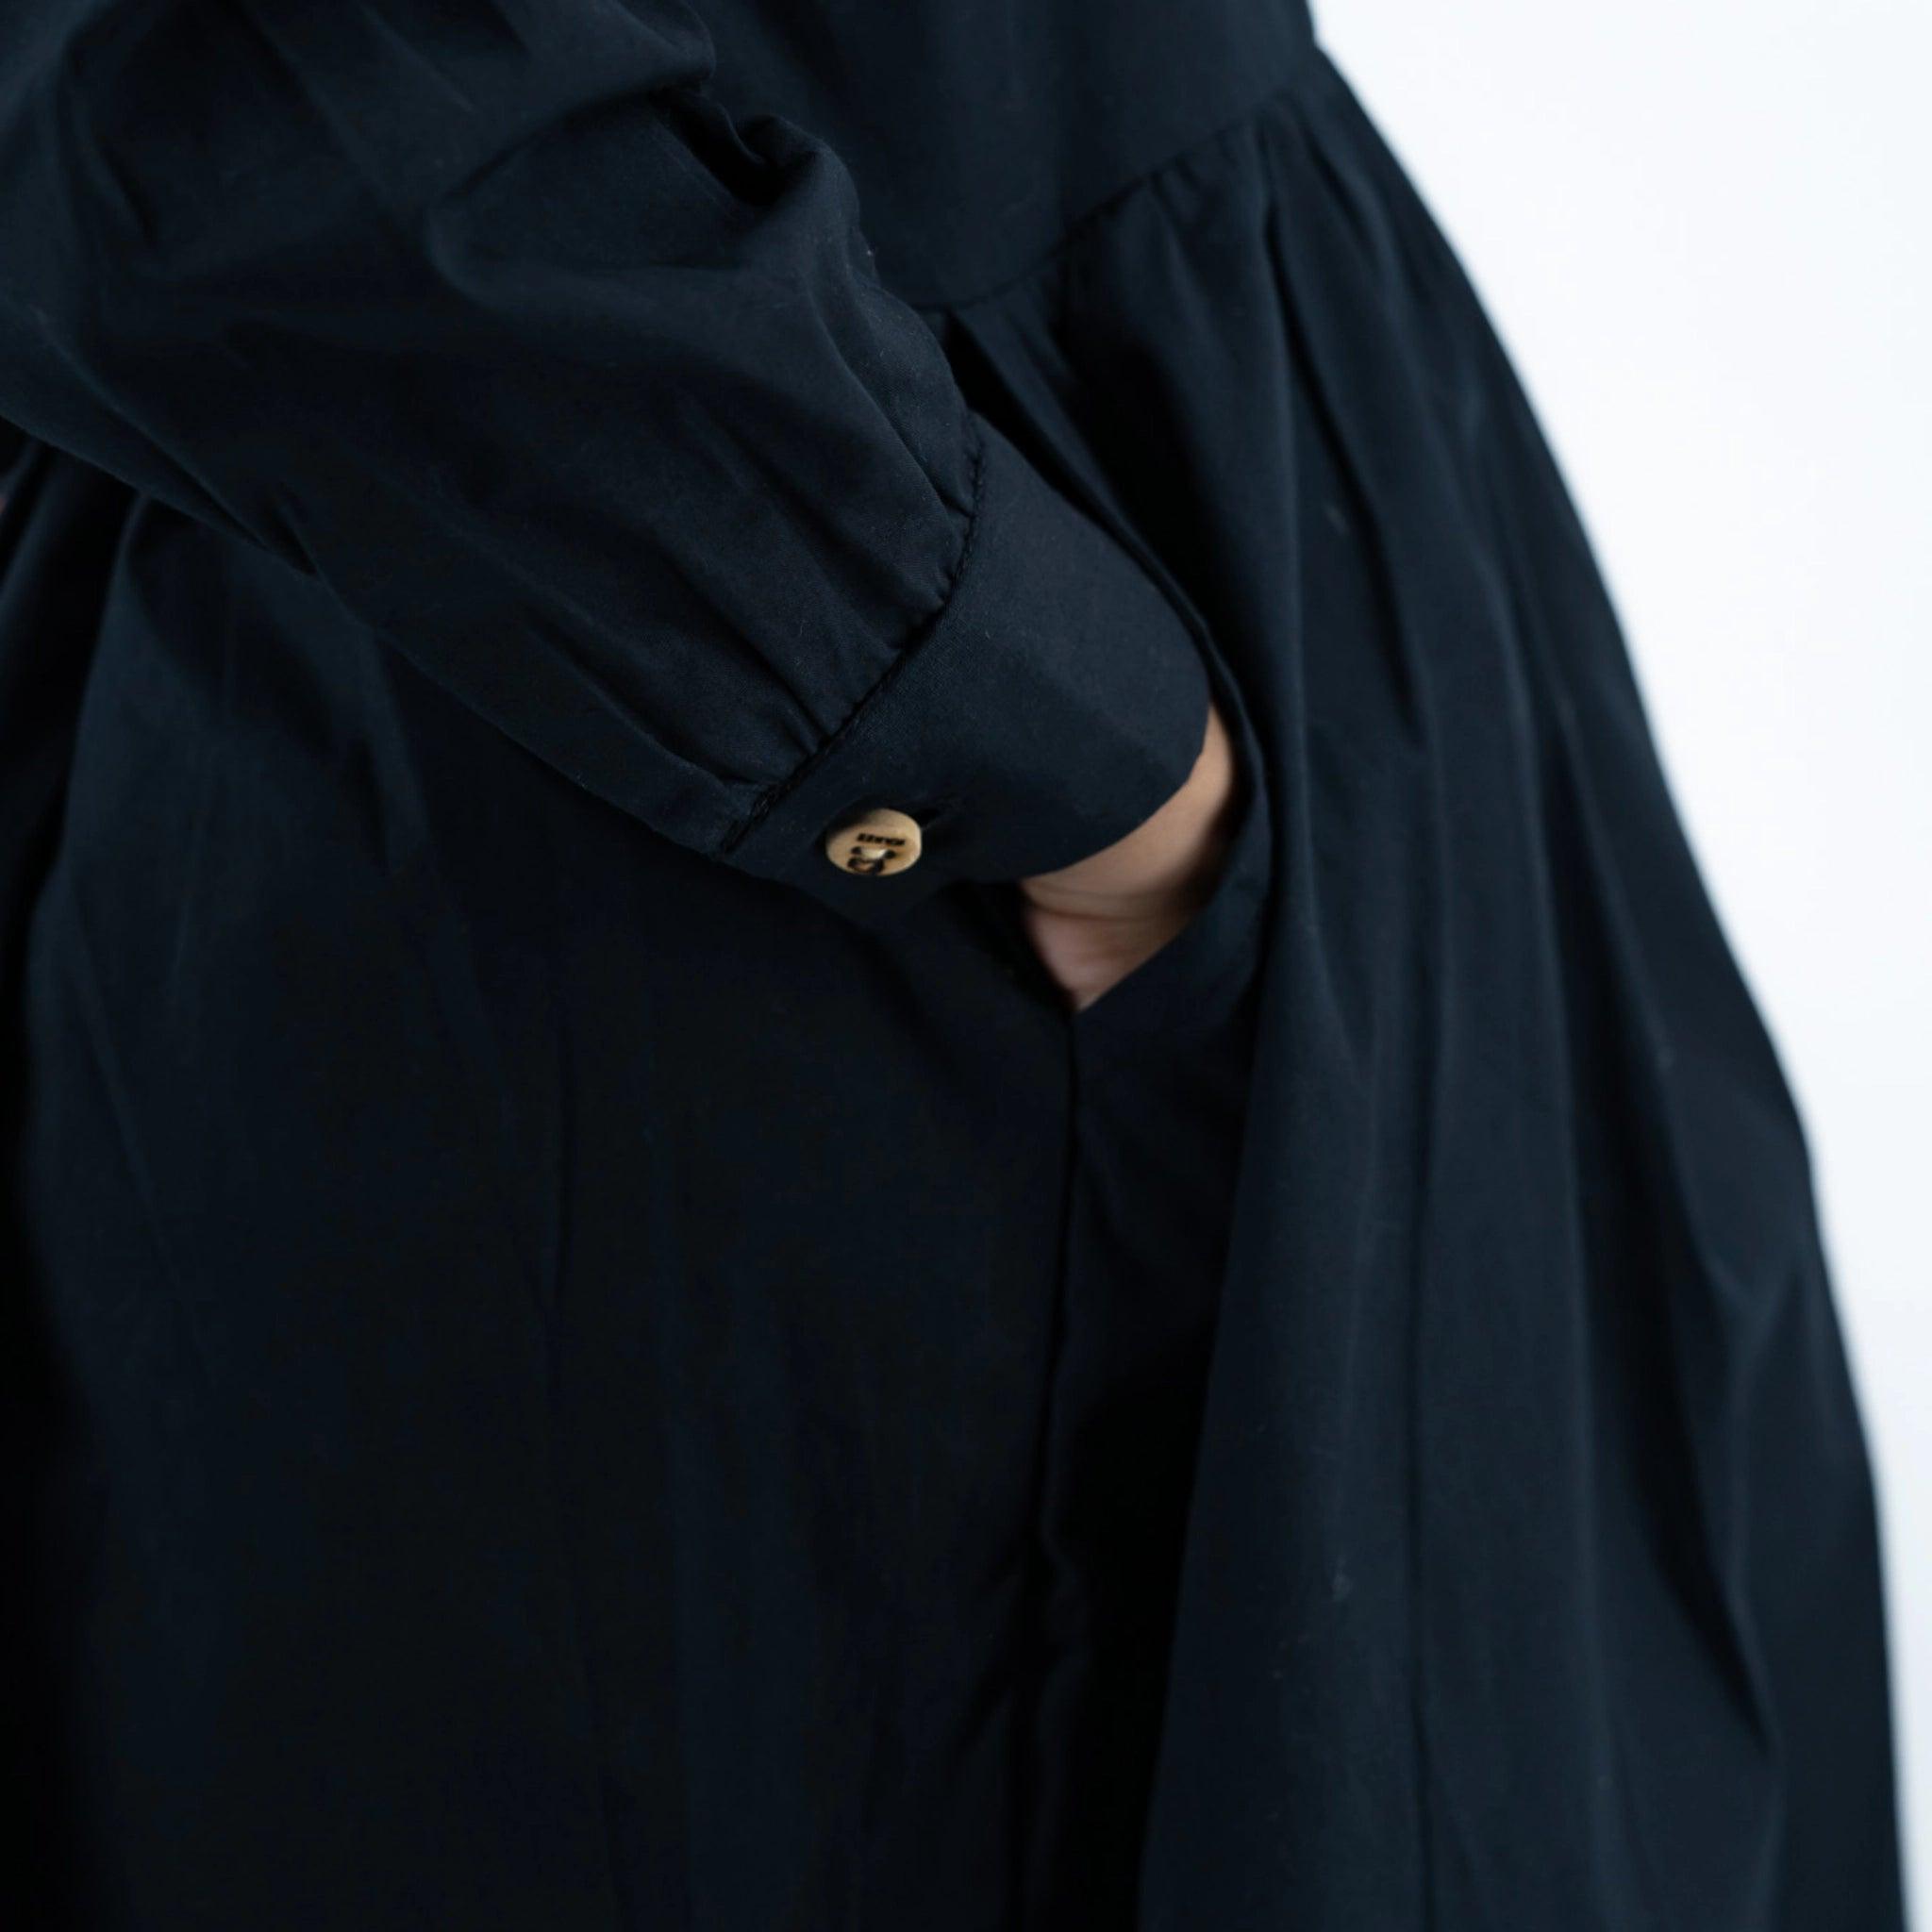 Close-up of a person wearing a dark navy trench coat with long puff sleeves, focusing on the cuff and golden button by Karee.